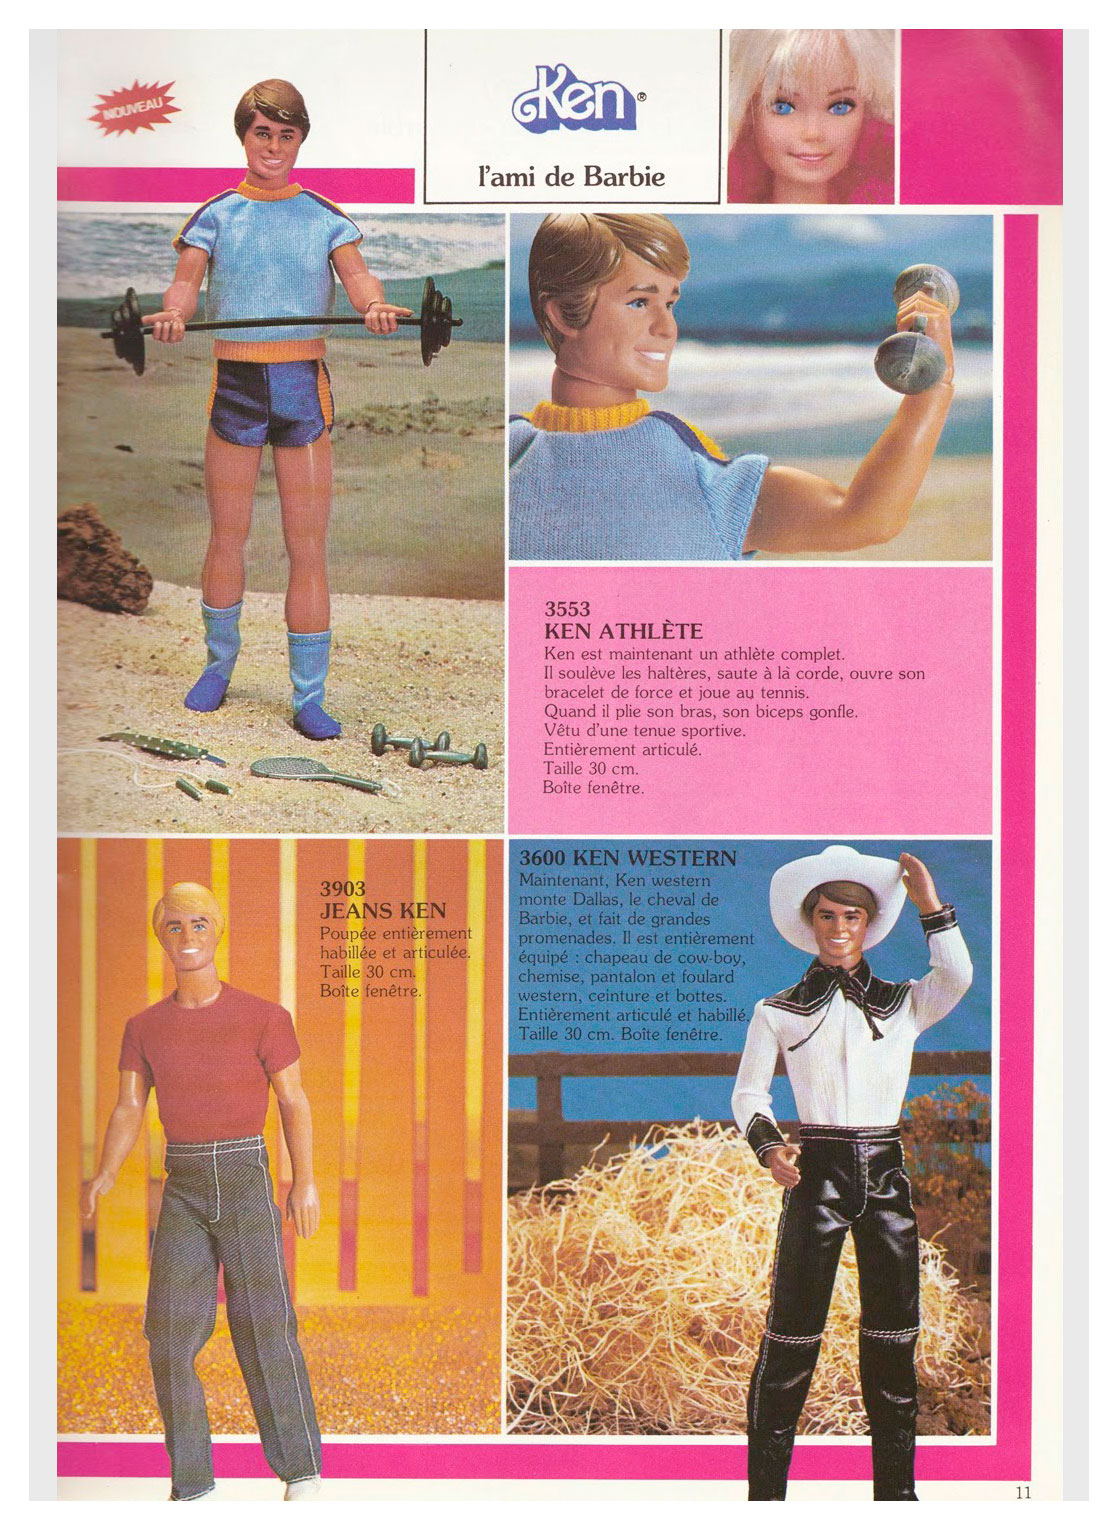 From 1982 French Mattel dealer catalogue